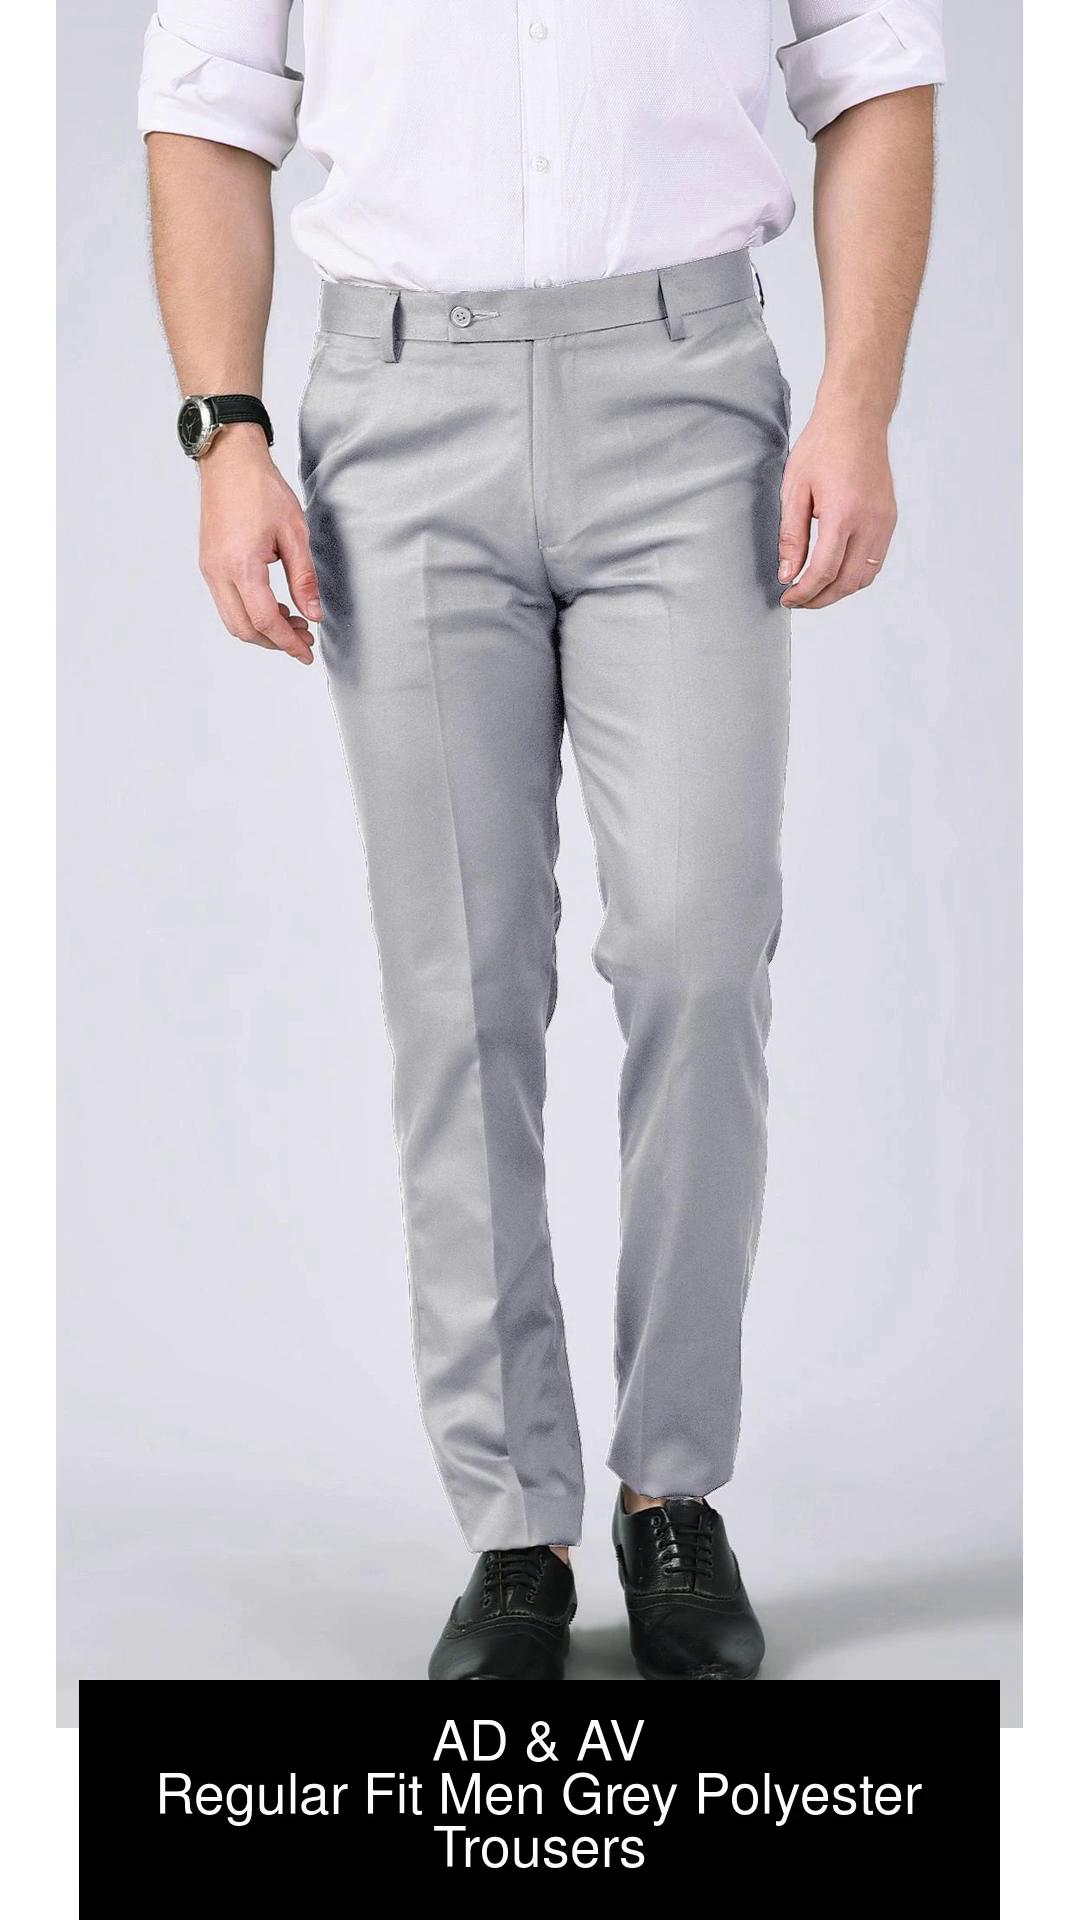 Track Pant - Dark Grey colour, buy online from - ScholarShoppe